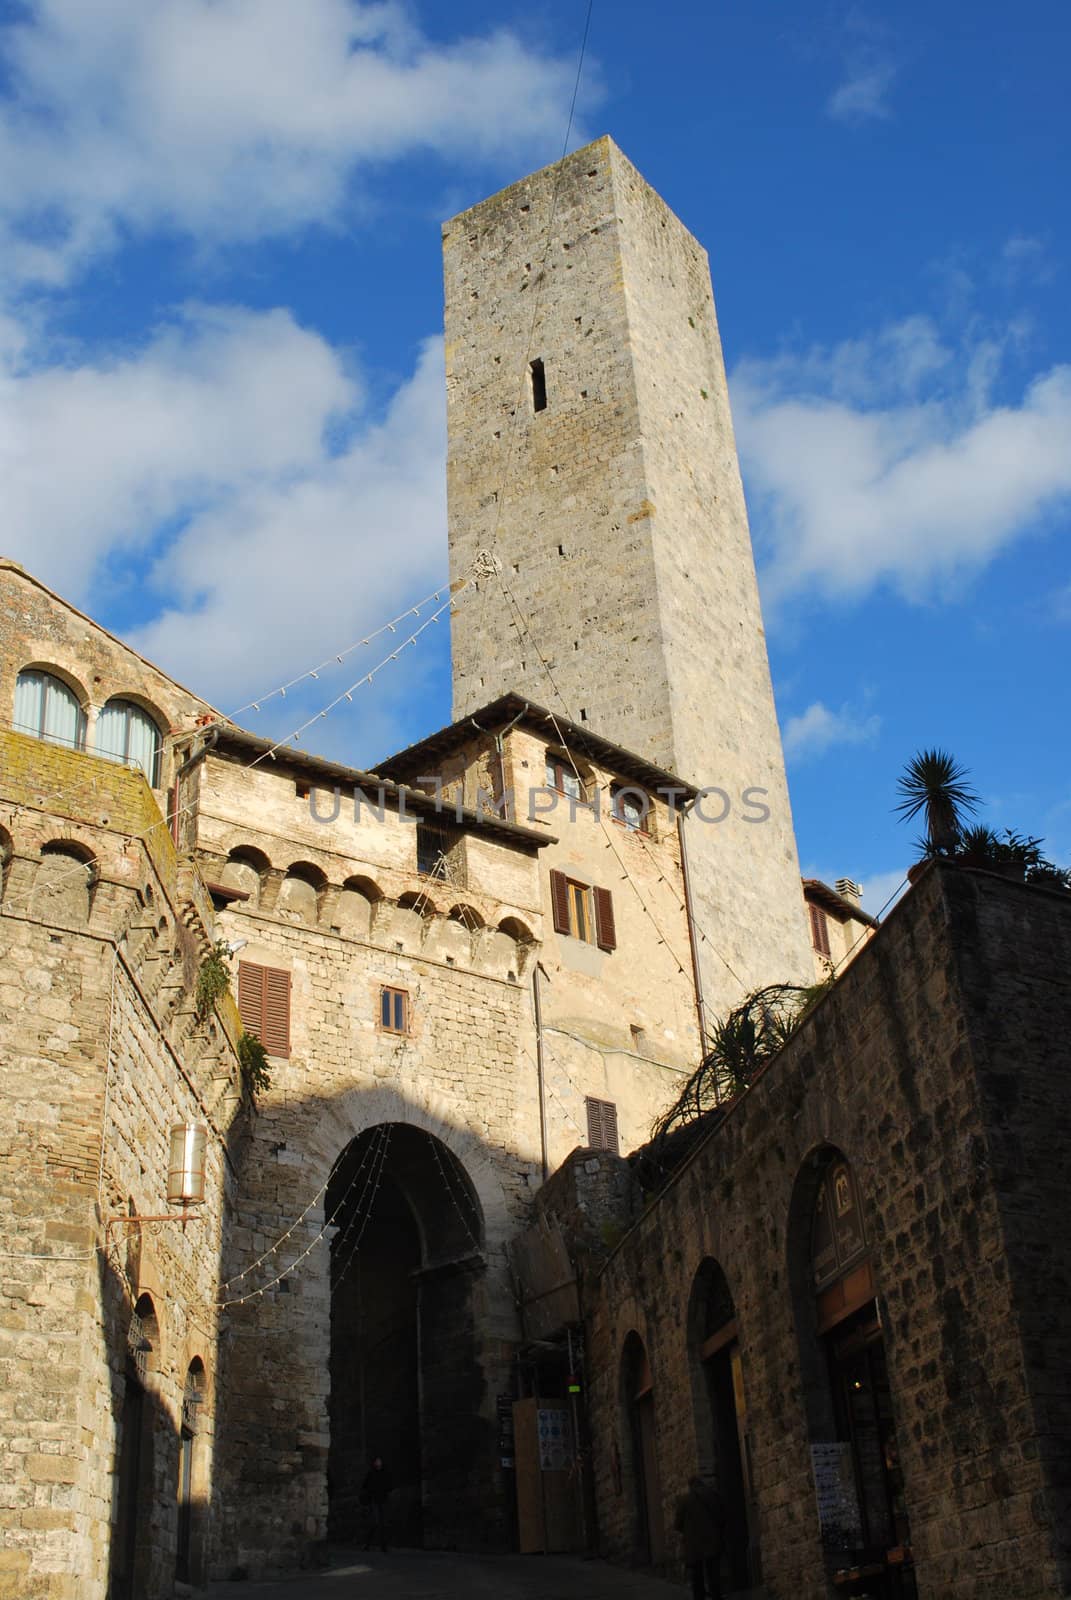 San Gimignano is a medieval town near Florence famous for his towers